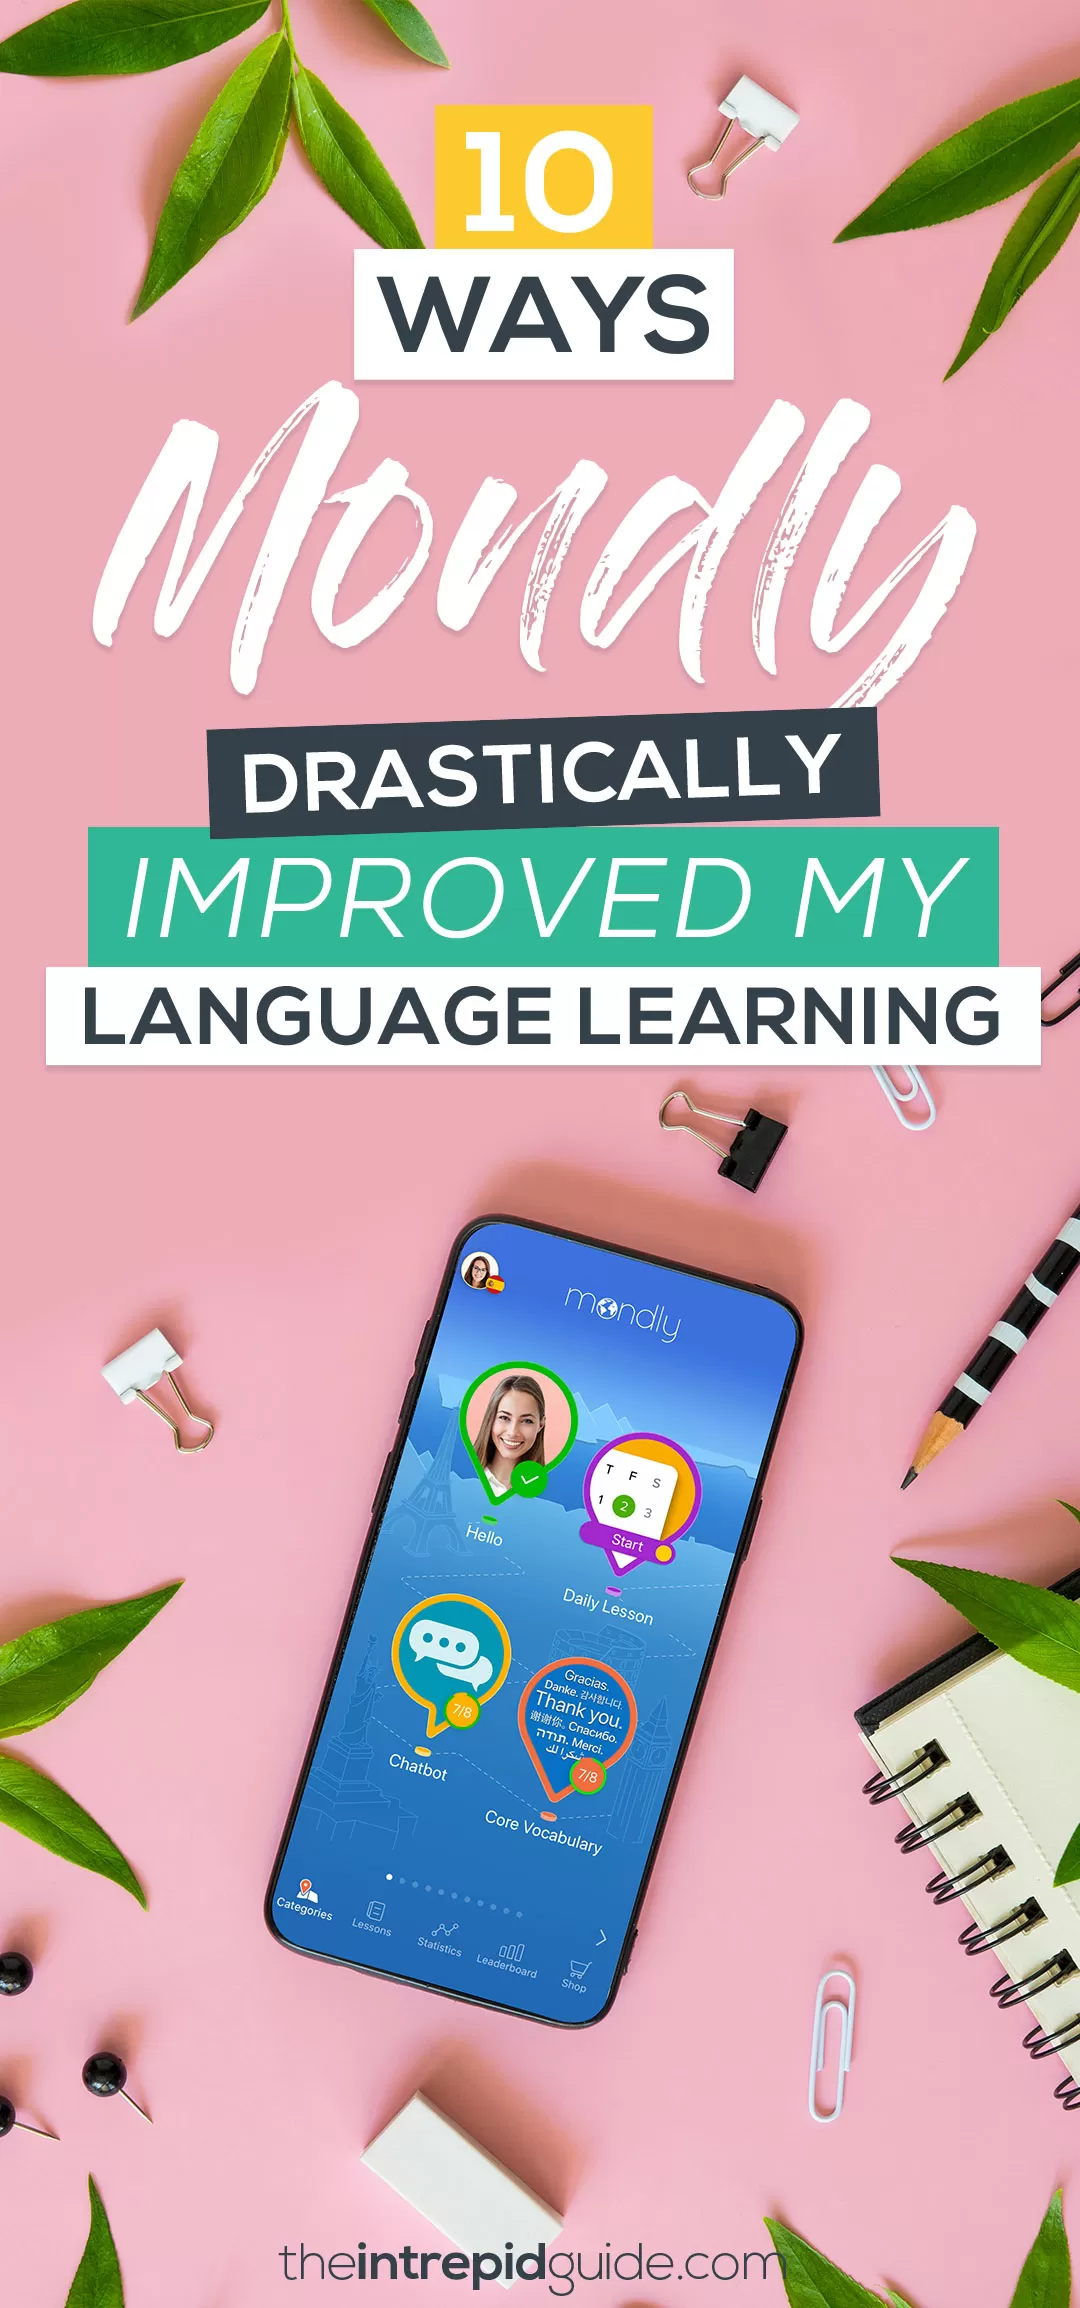 Mondly Review - 10 Ways Mondly Drastically Improved My Language Learning